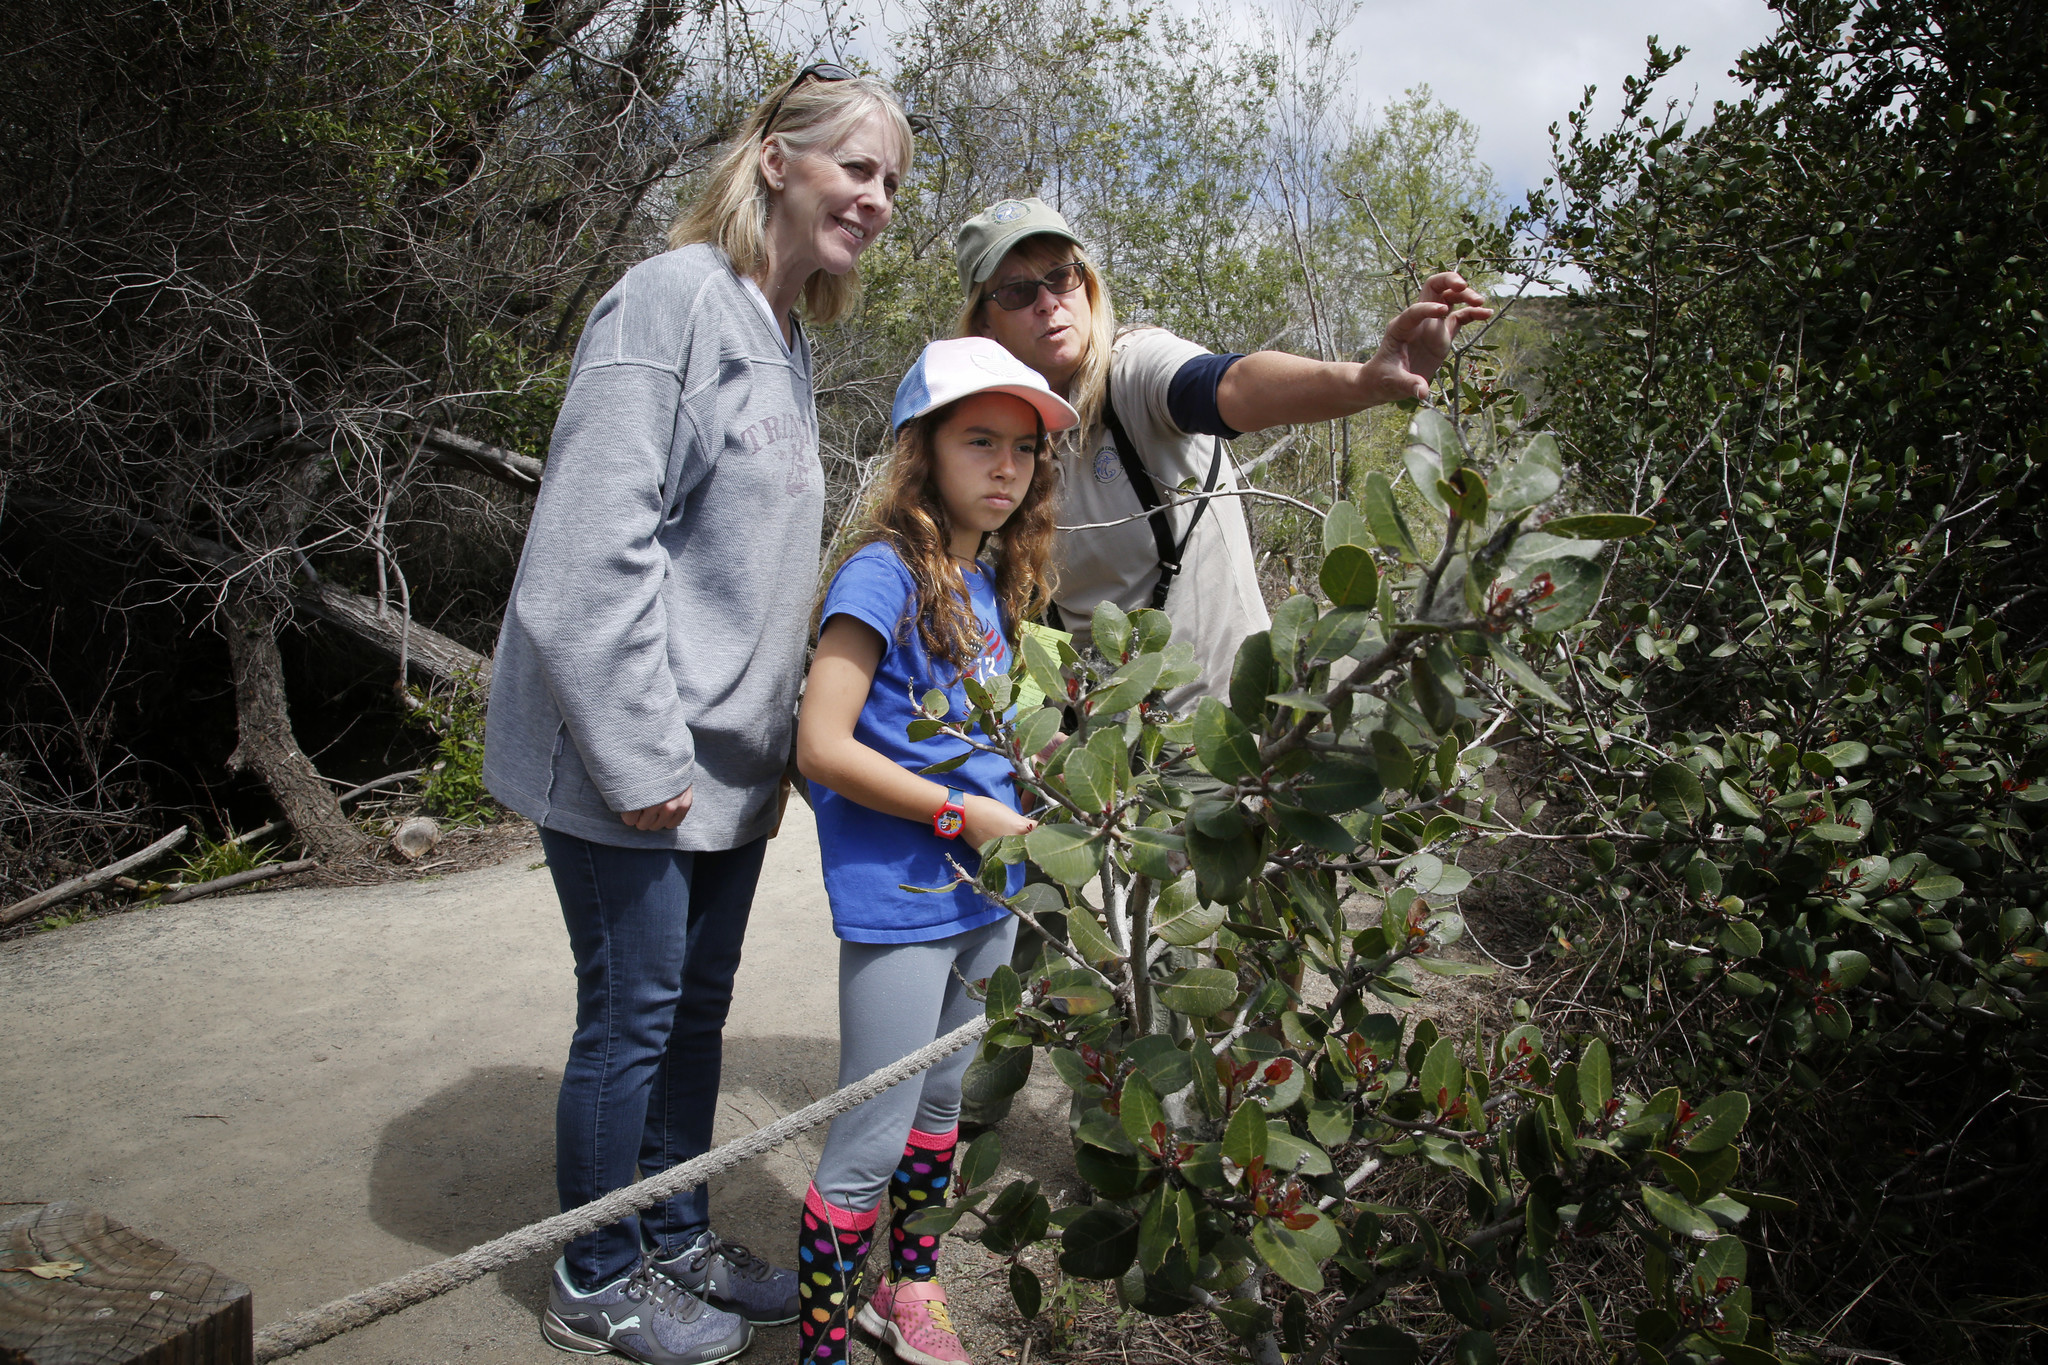 Lagoon blooms with education, fun activities on family day